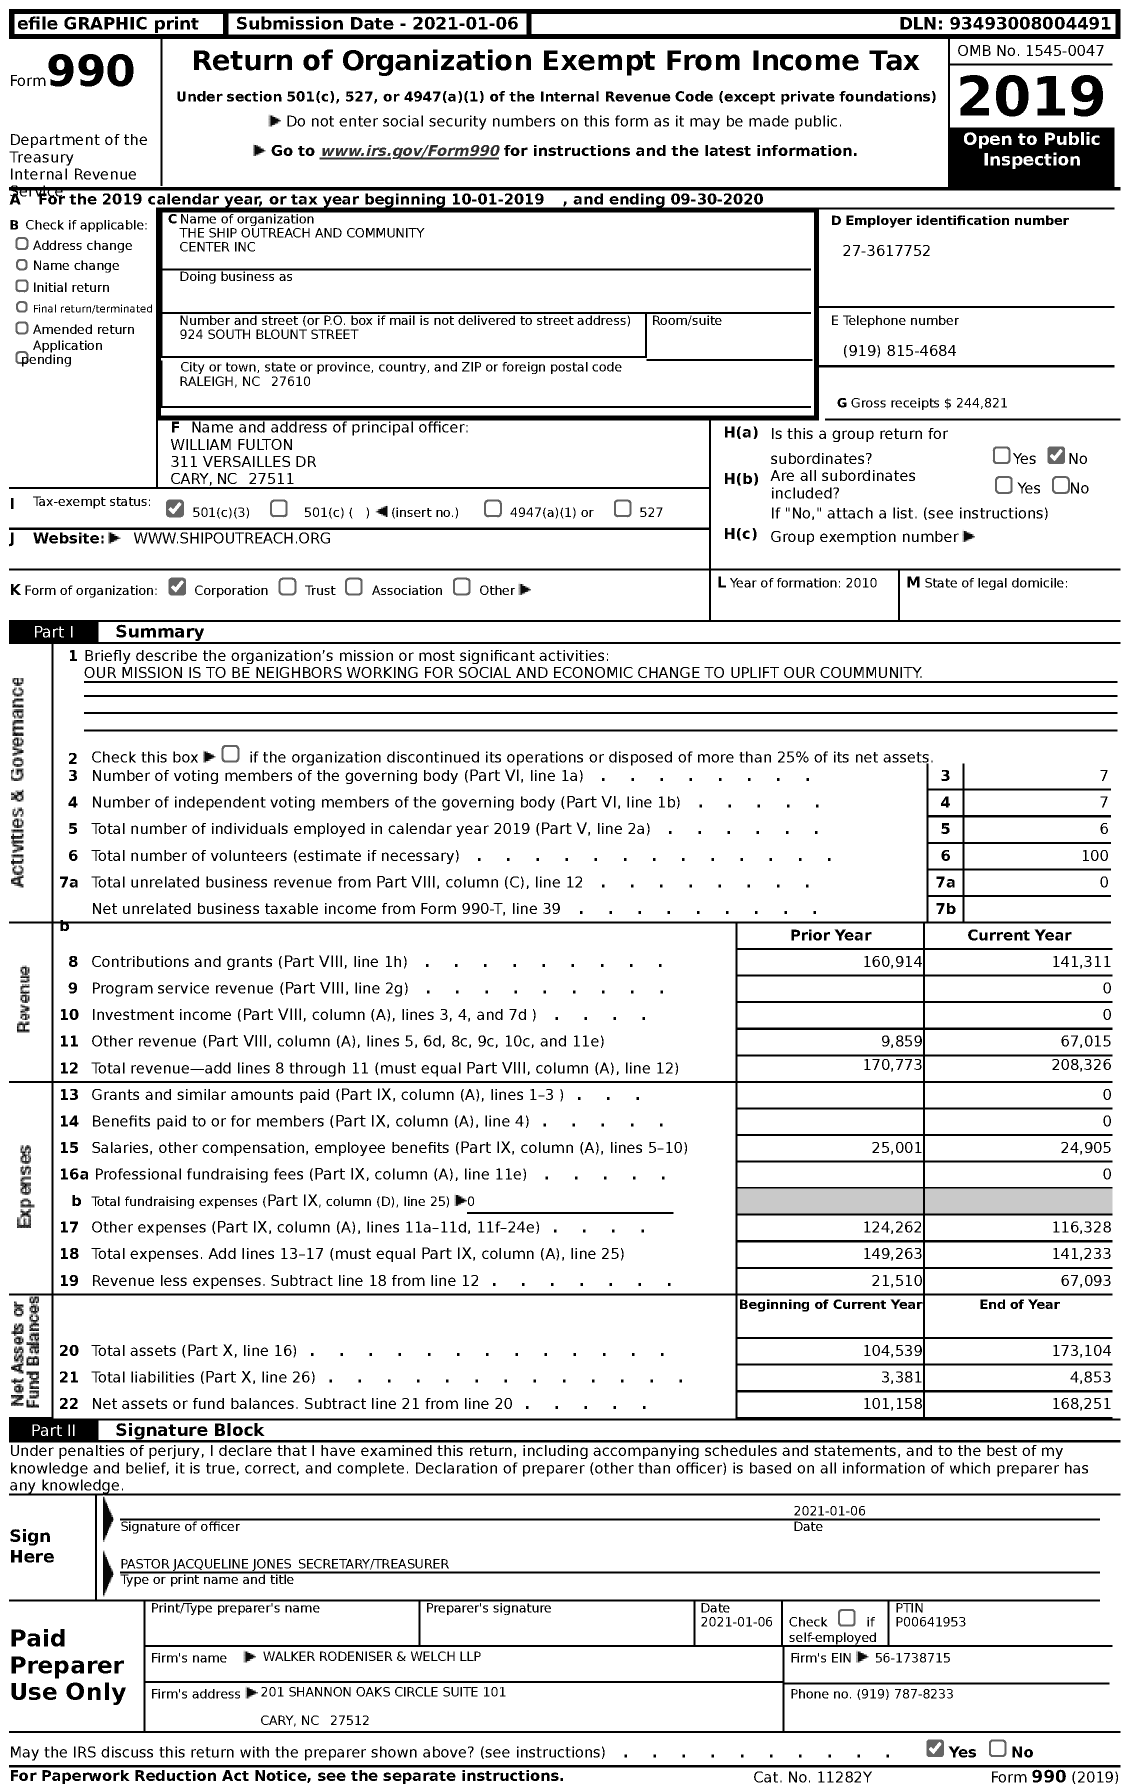 Image of first page of 2019 Form 990 for The Ship Outreach and Community Center